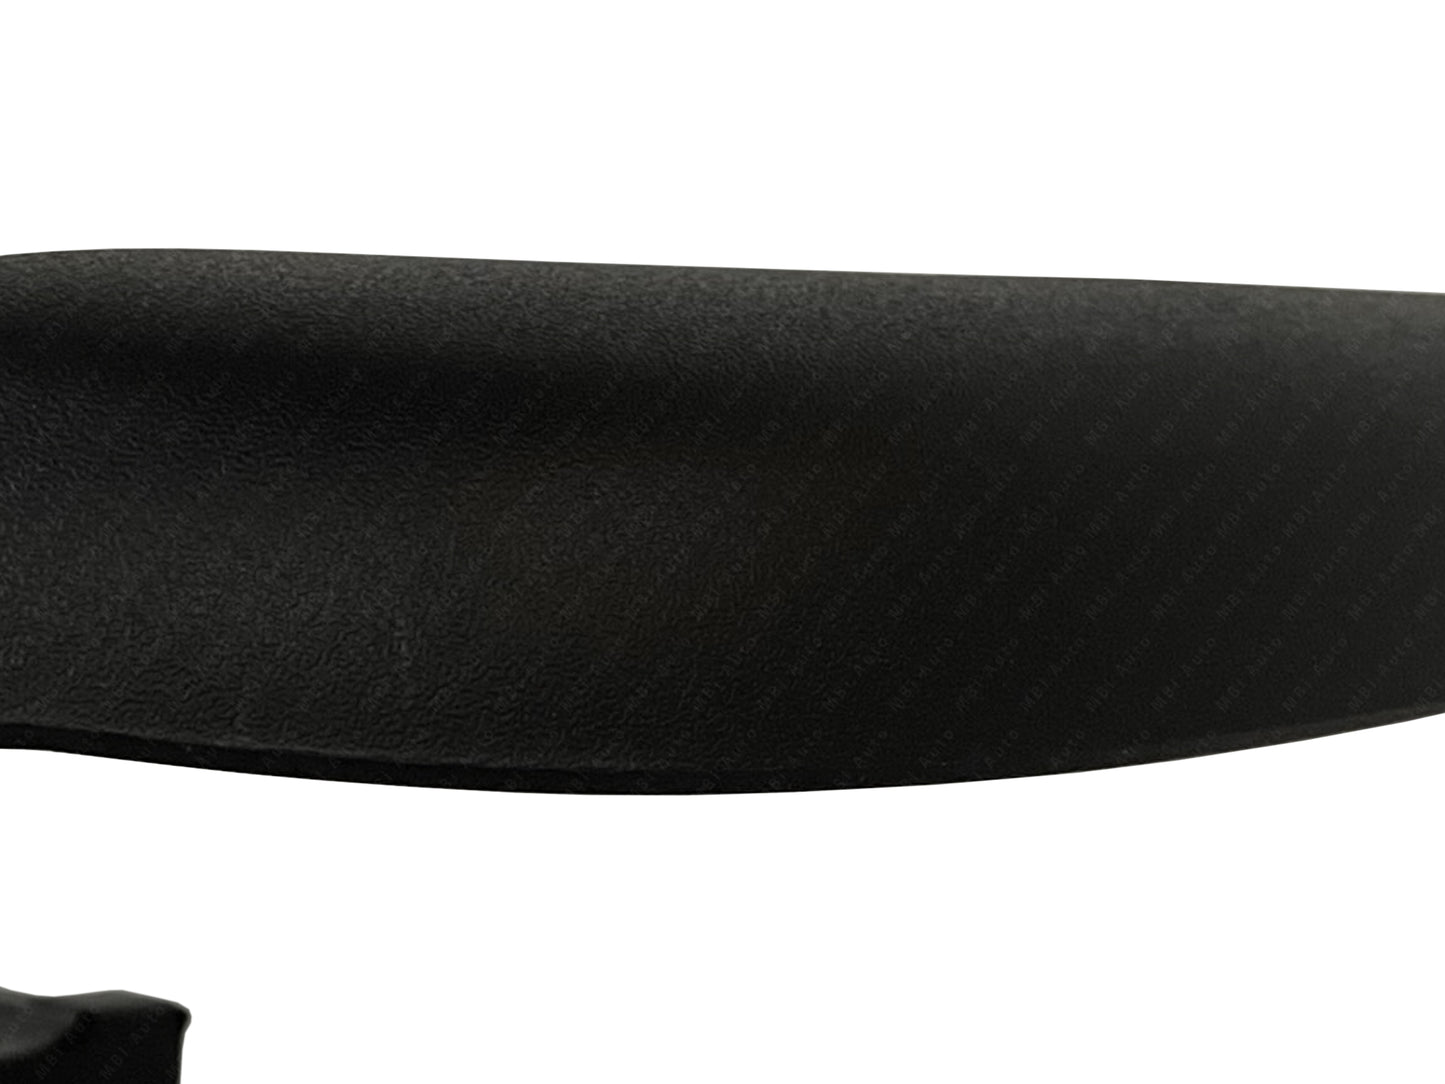 Toyota Tacoma 2005 - 2015 Rear Textured Passenger Side Step Pad 05 - 15 TO1147100 Bumper King